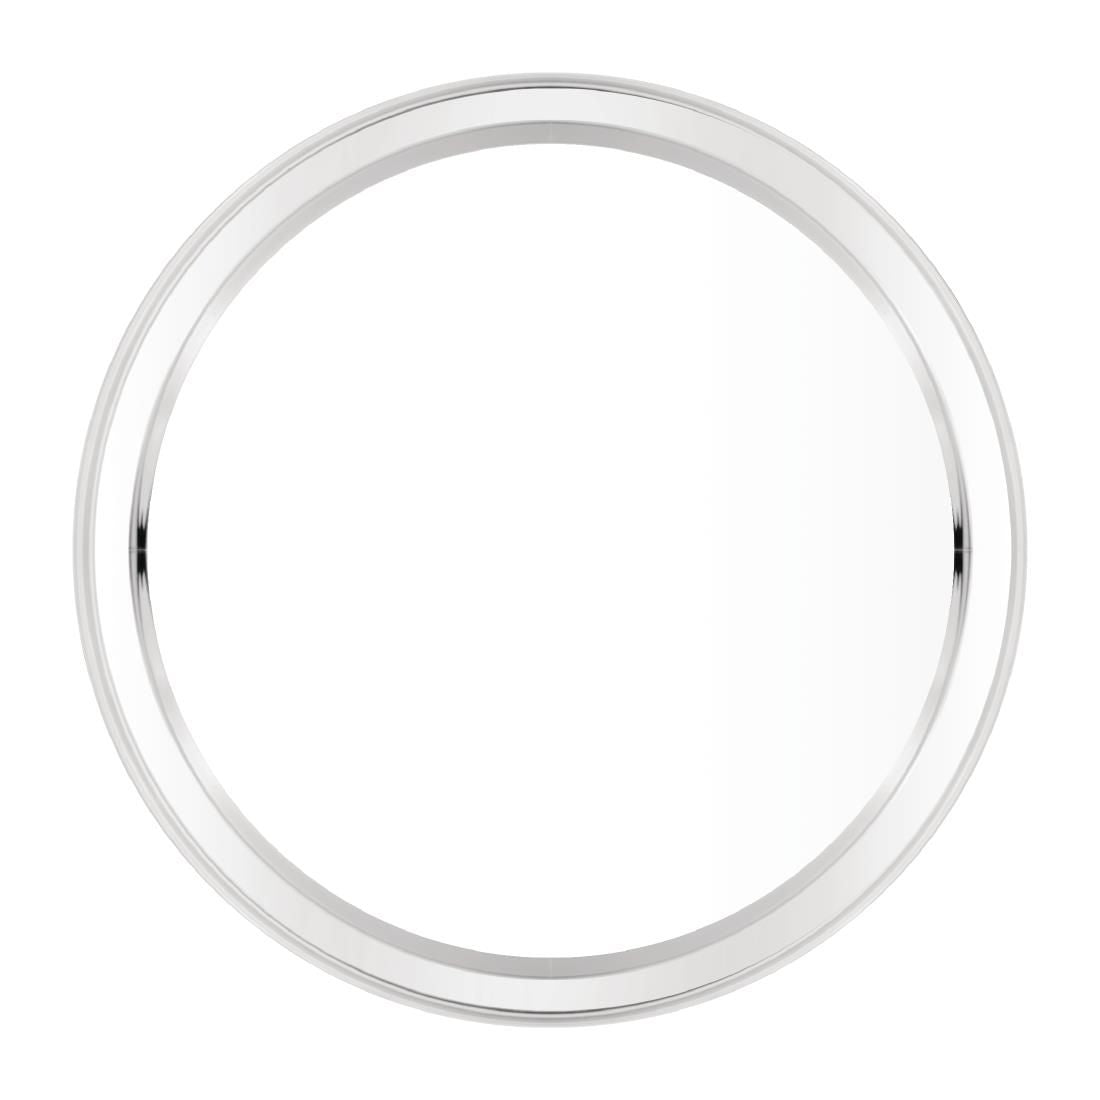 J828 Olympia Stainless Steel Round Service Tray 305mm